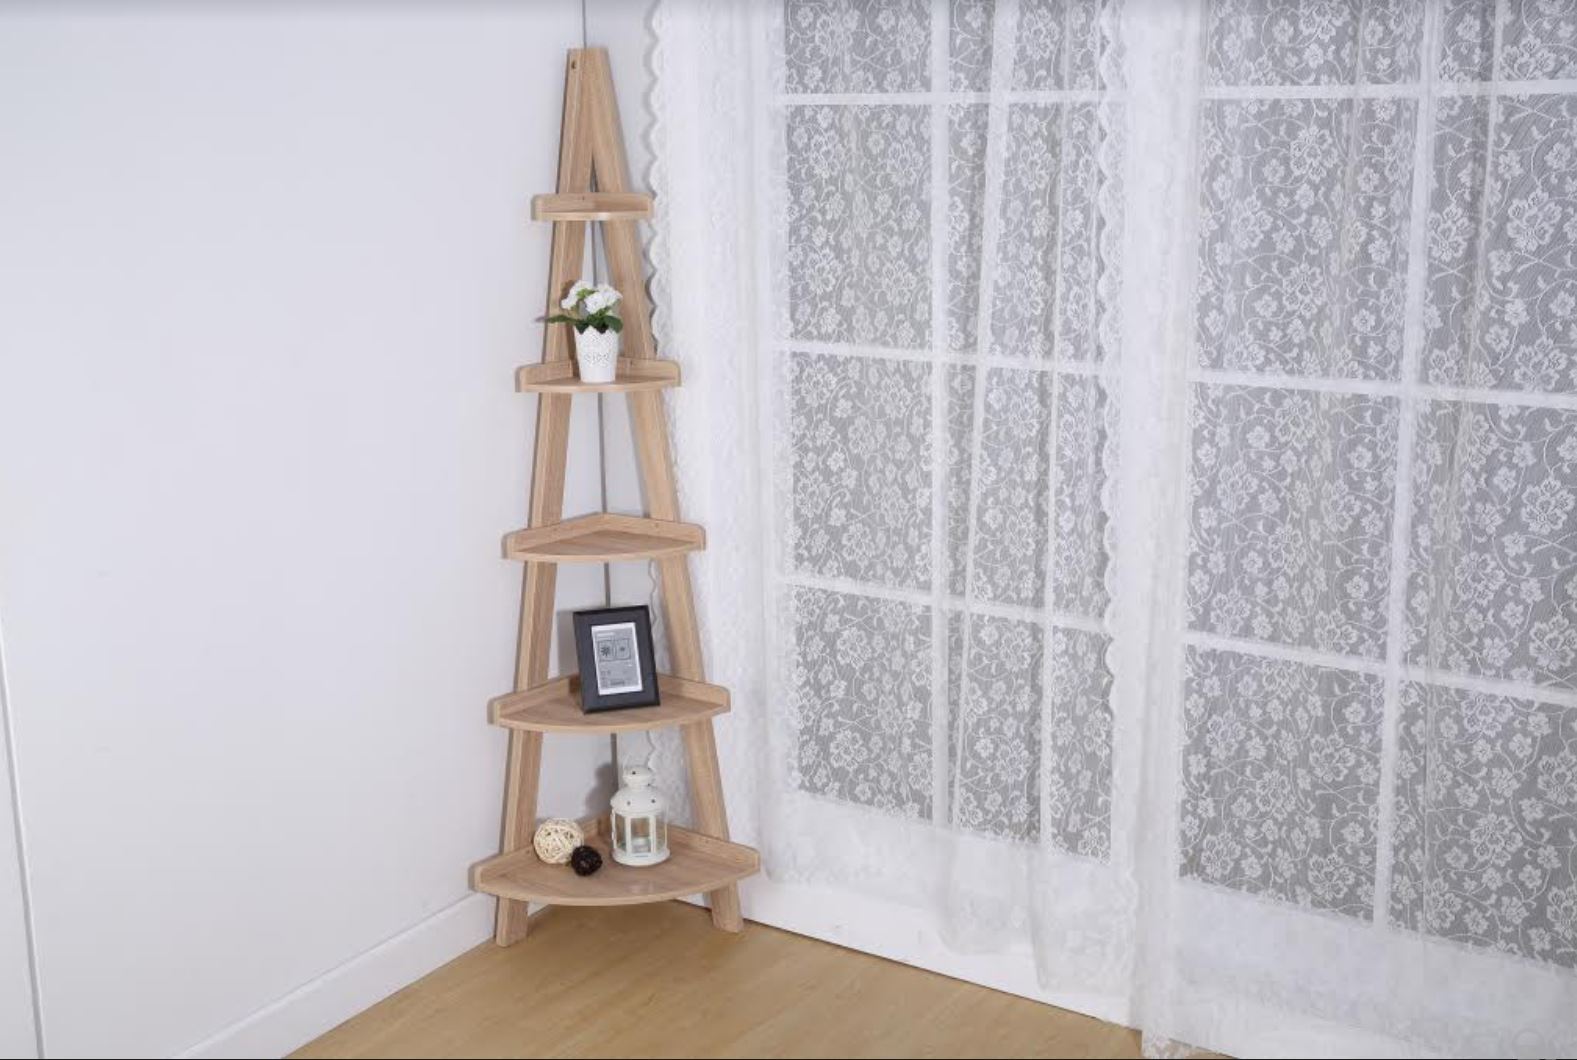 5-Tier A-Frame Storage and Display Corner Shelf In weathered White Finish